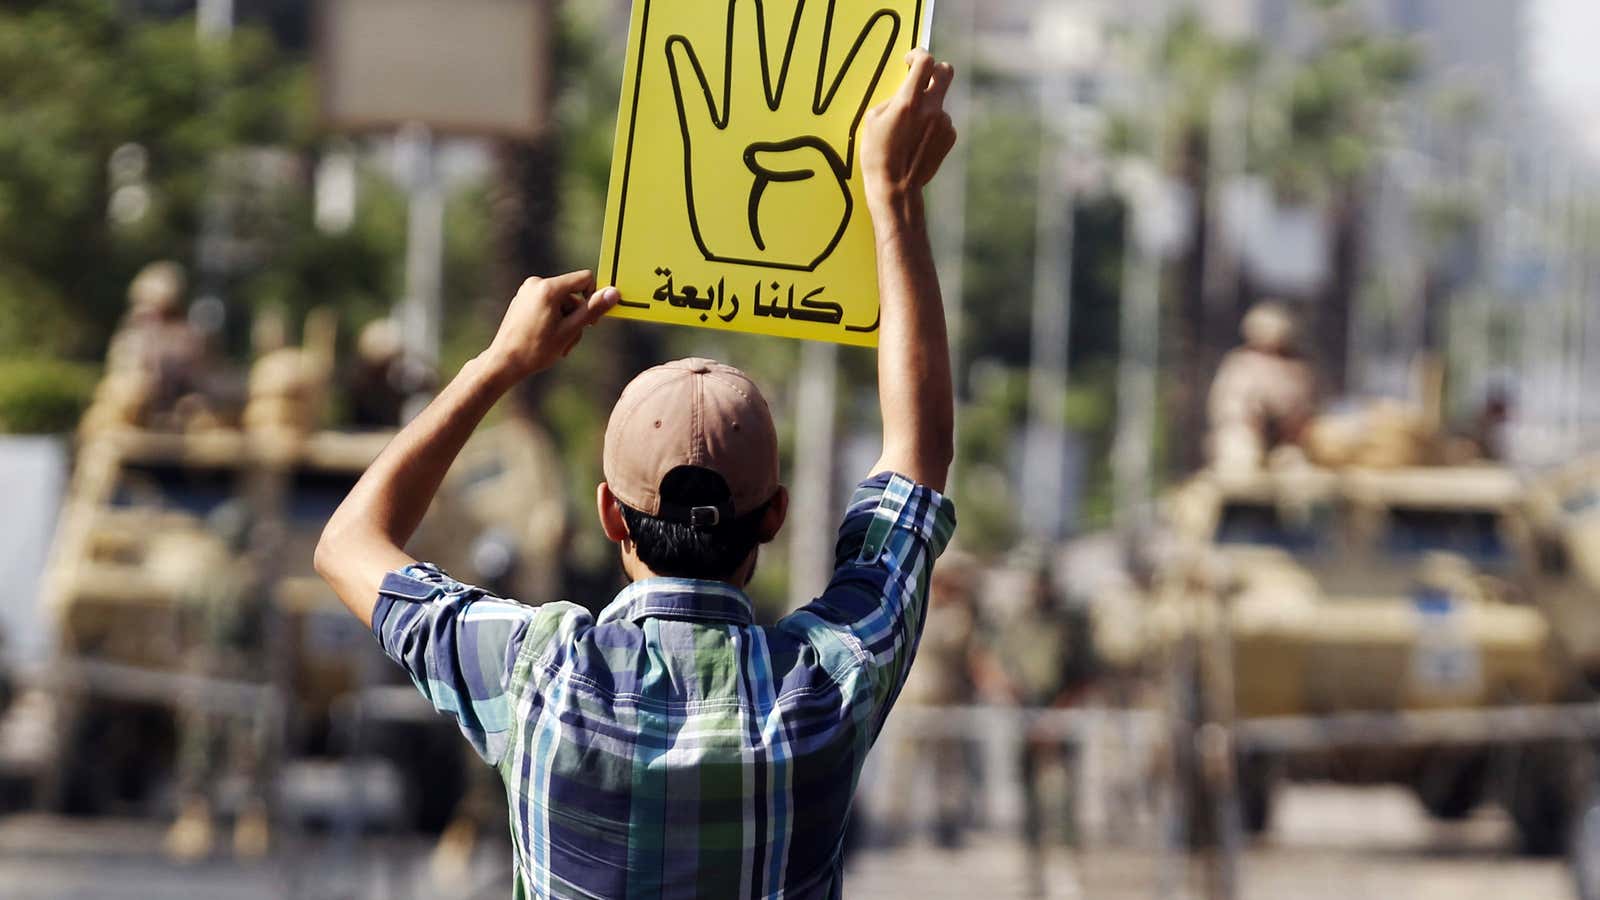 A supporter of ousted Egyptian President Mohamed Morsi protests against the military and interior ministry in Cairo.